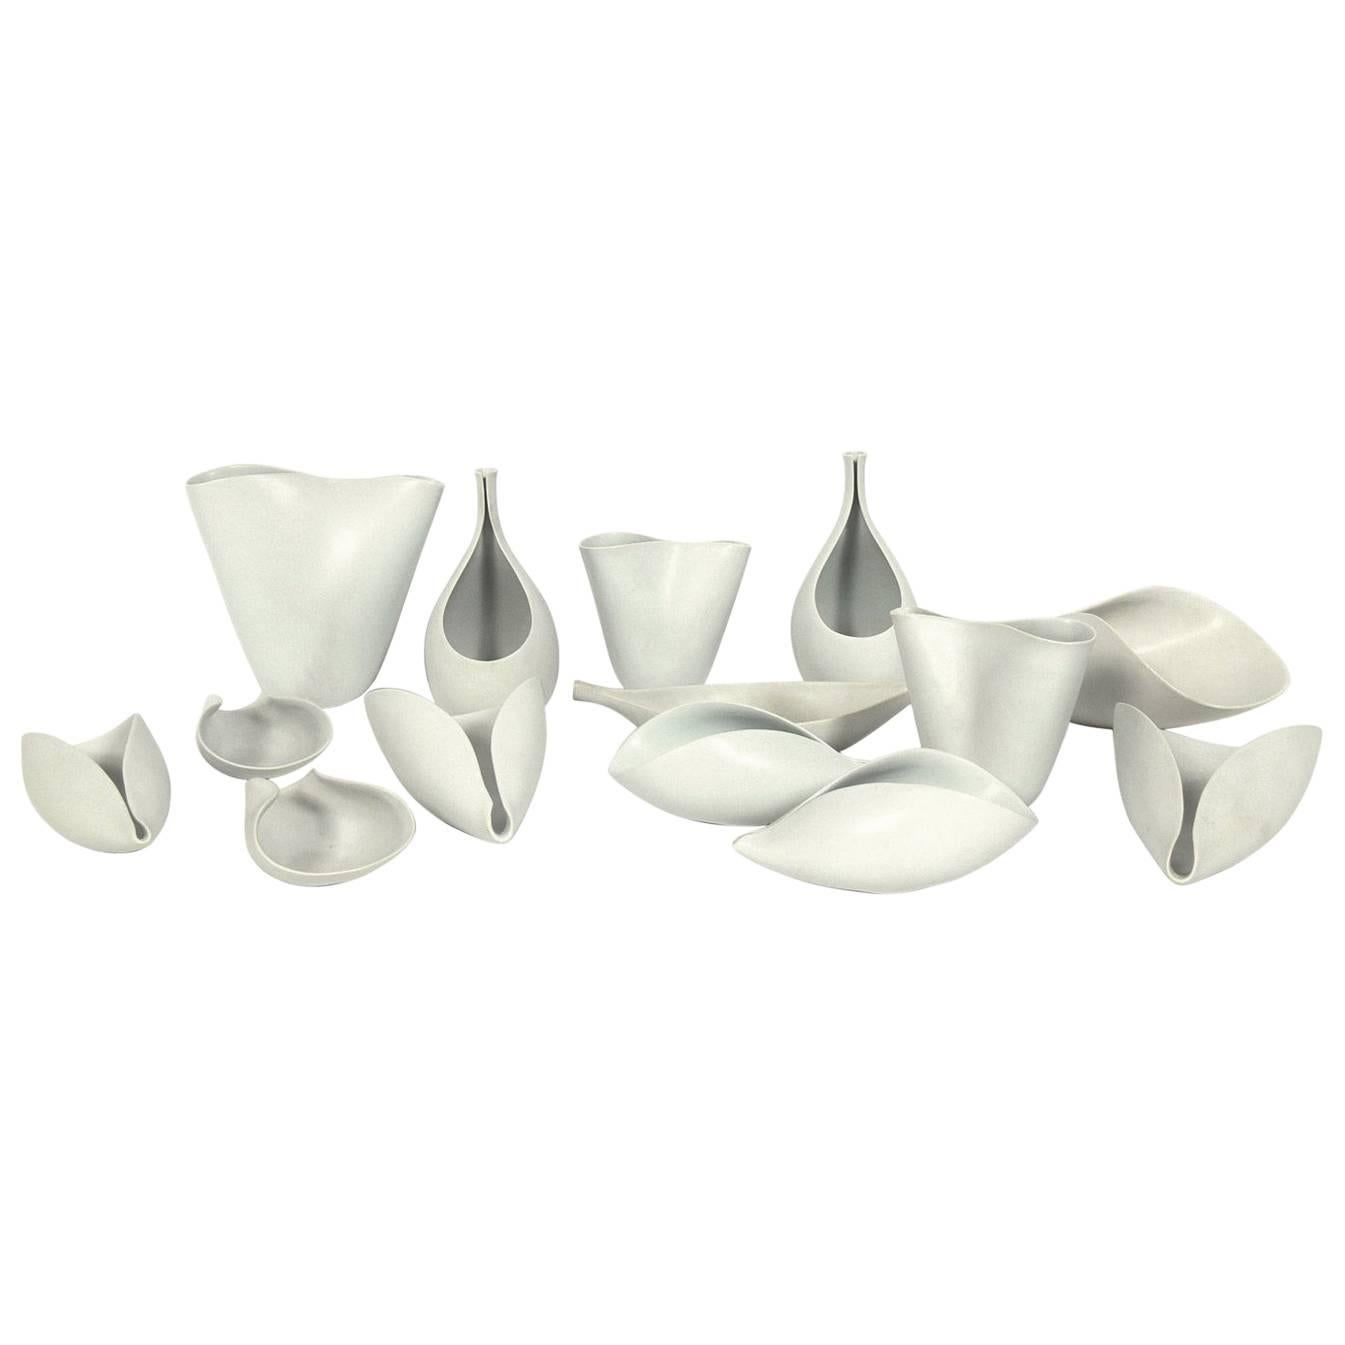 Group of Fourteen Sculptural White Veckla Pottery Pieces by Stig Lindberg For Sale